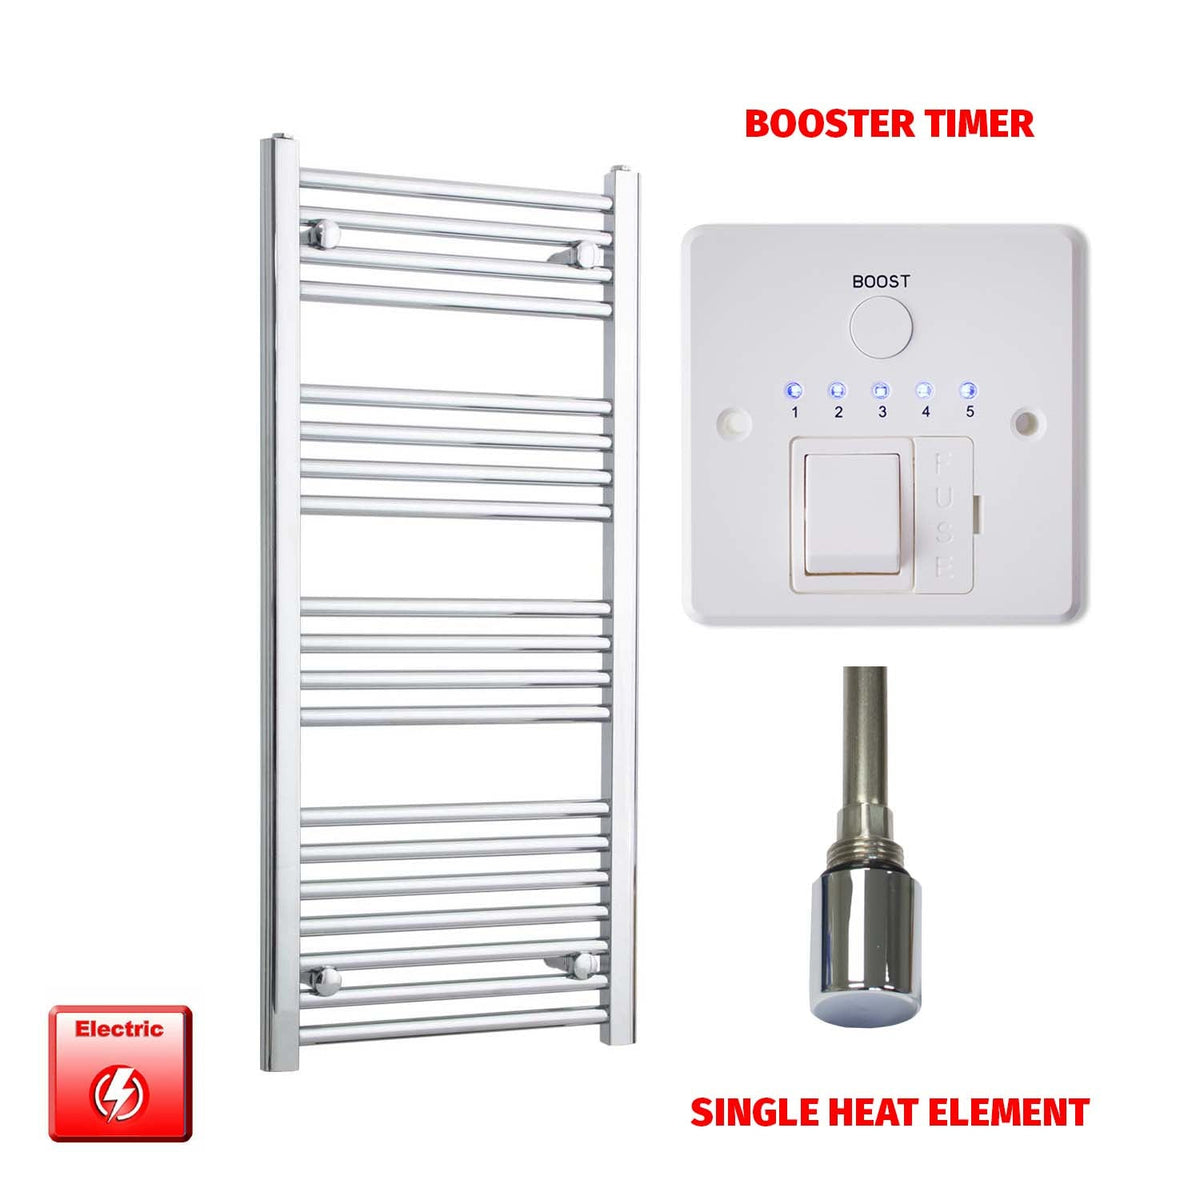 1000mm High 450mm Wide Pre-Filled Electric Heated Towel Radiator Straight Chrome Single heat element Booster timer